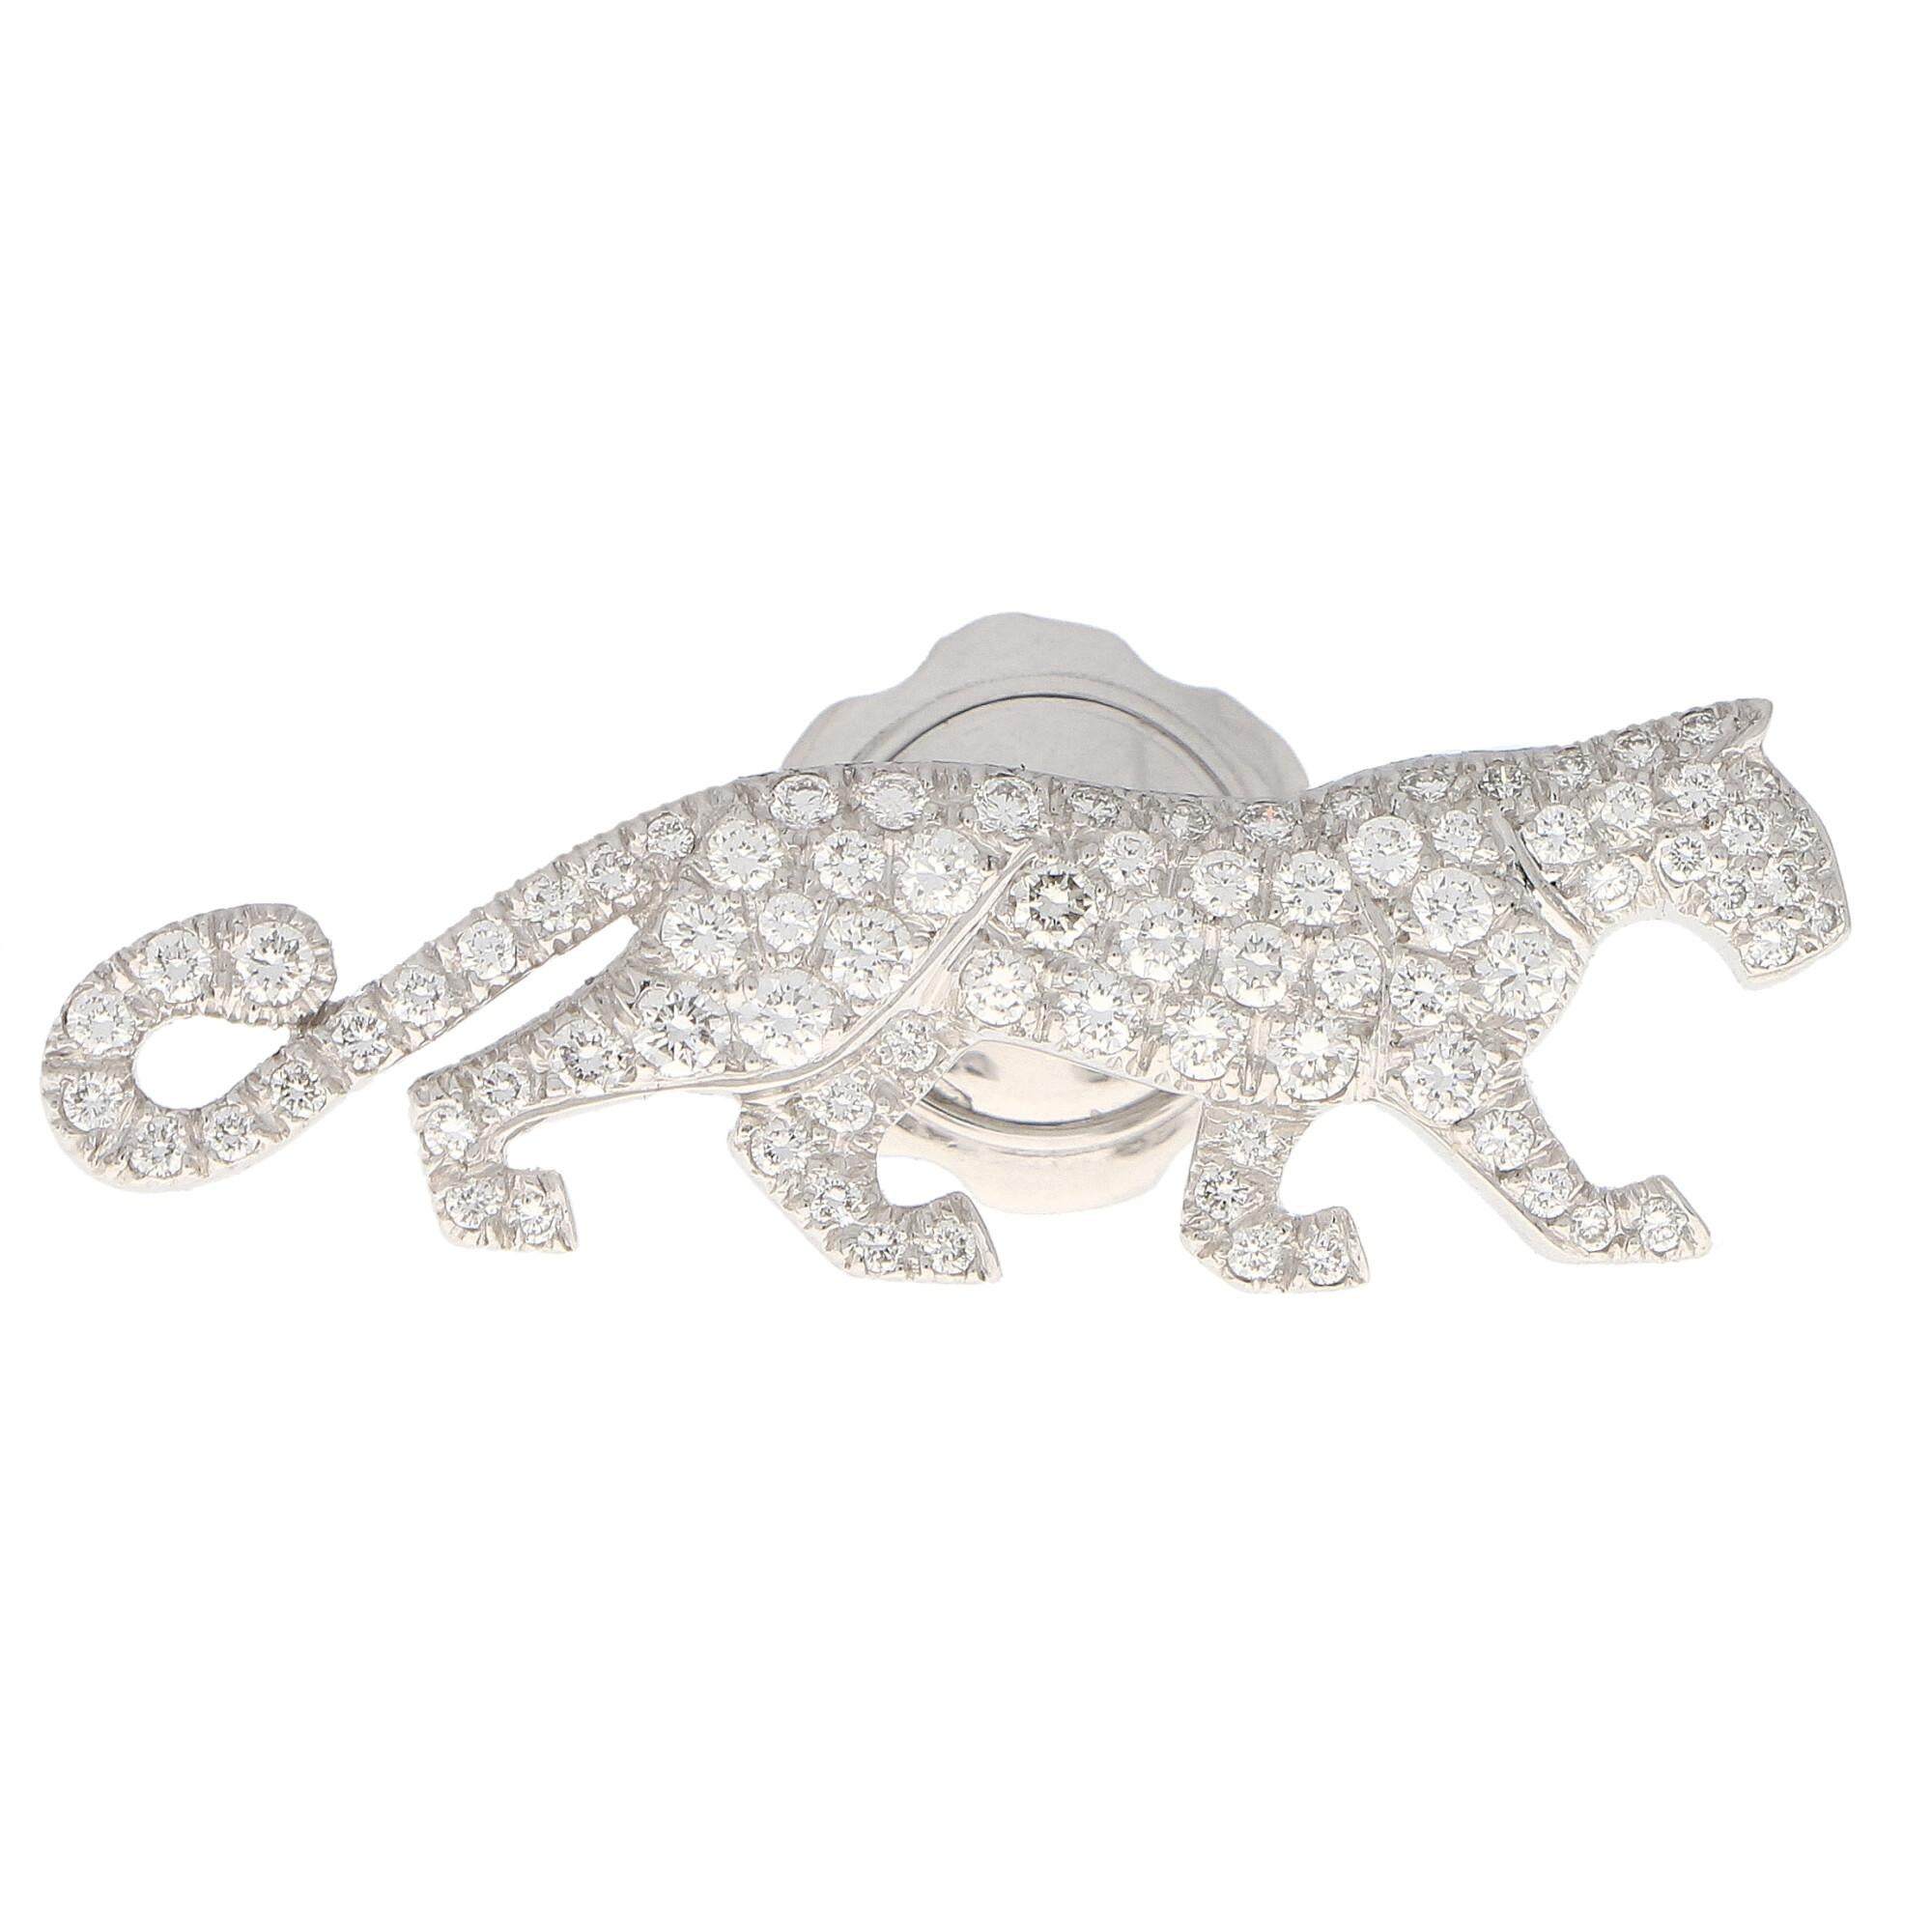 Rare Vintage Cartier Diamond Panther Pin Brooch in 18k White Gold 2